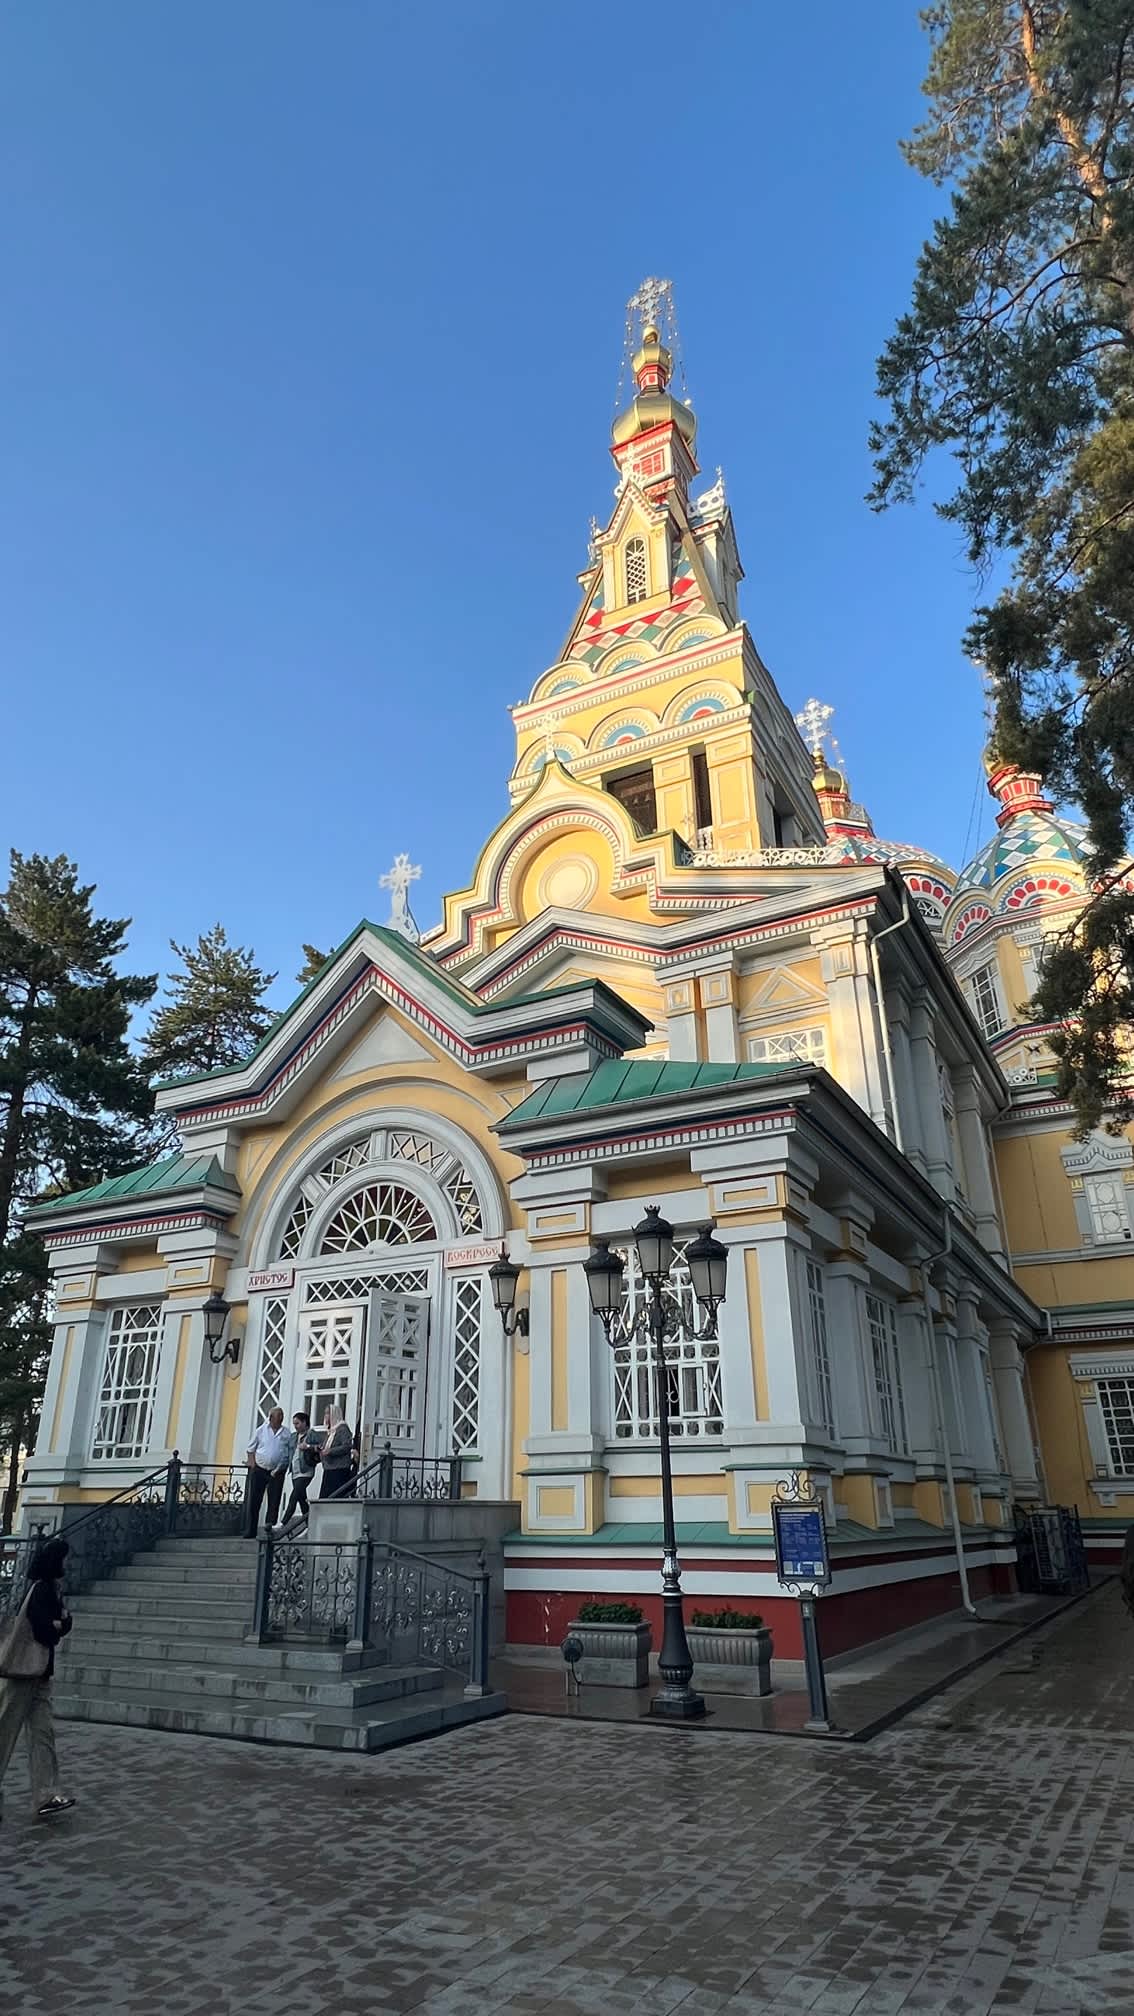 The Ascension Cathedral in Almaty, Kazakhstan, with its bright, multicolored facade and ornate architecture, set against a clear blue sky.